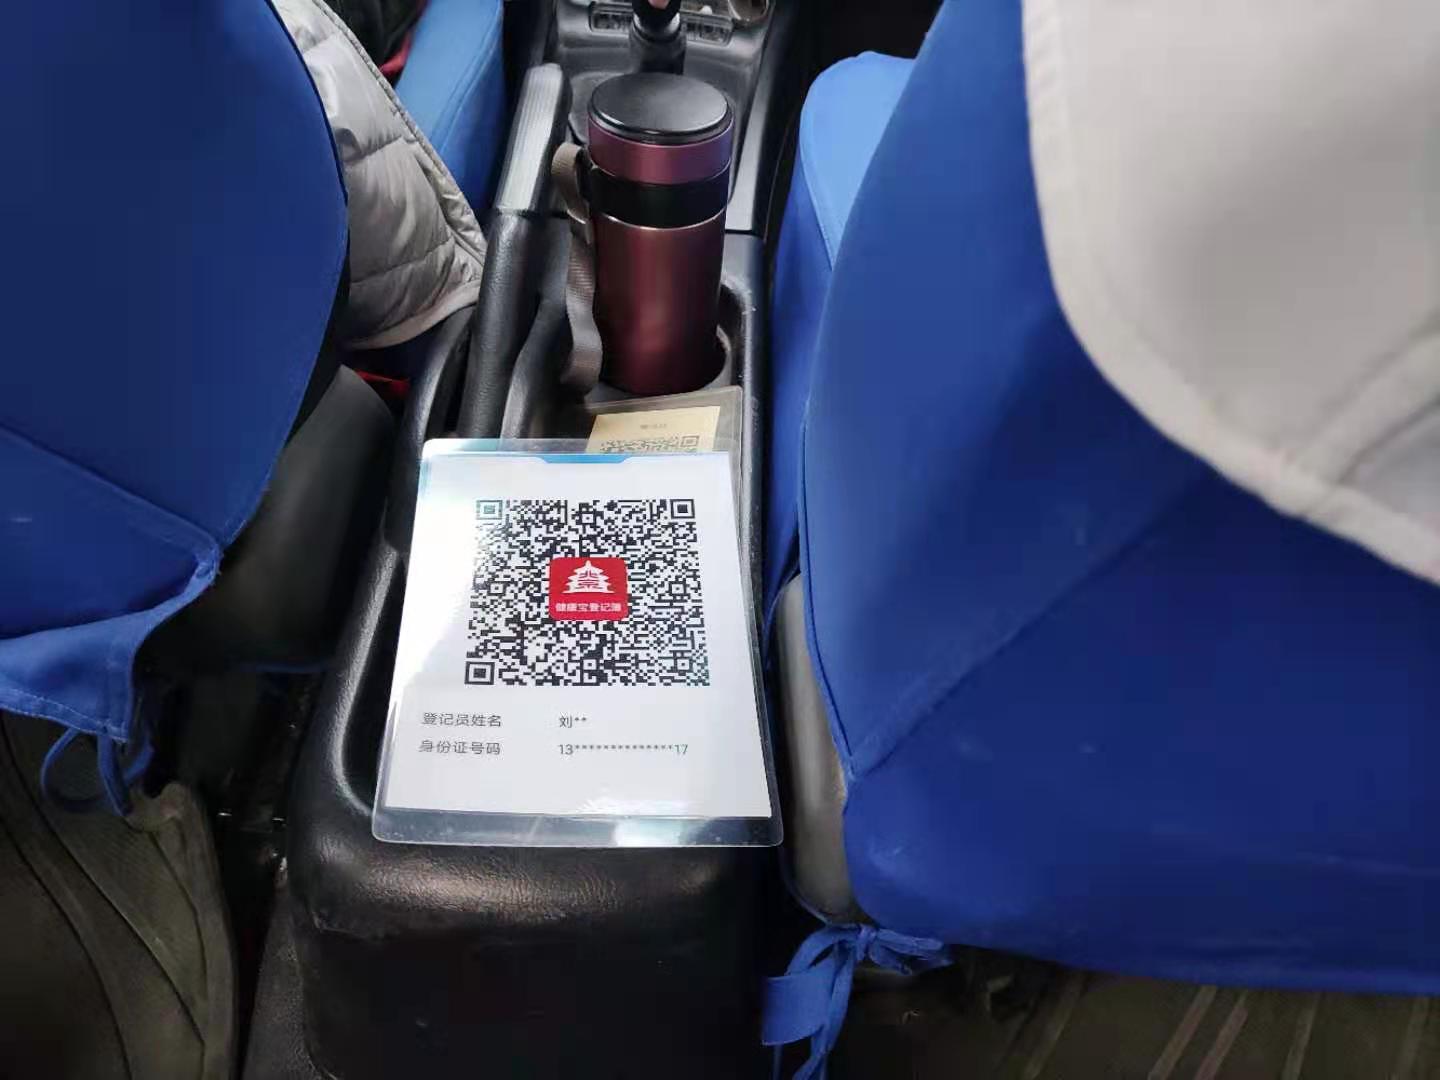 Beijing vaccinates drivers, collects passenger data via health codes to curb COVID-19